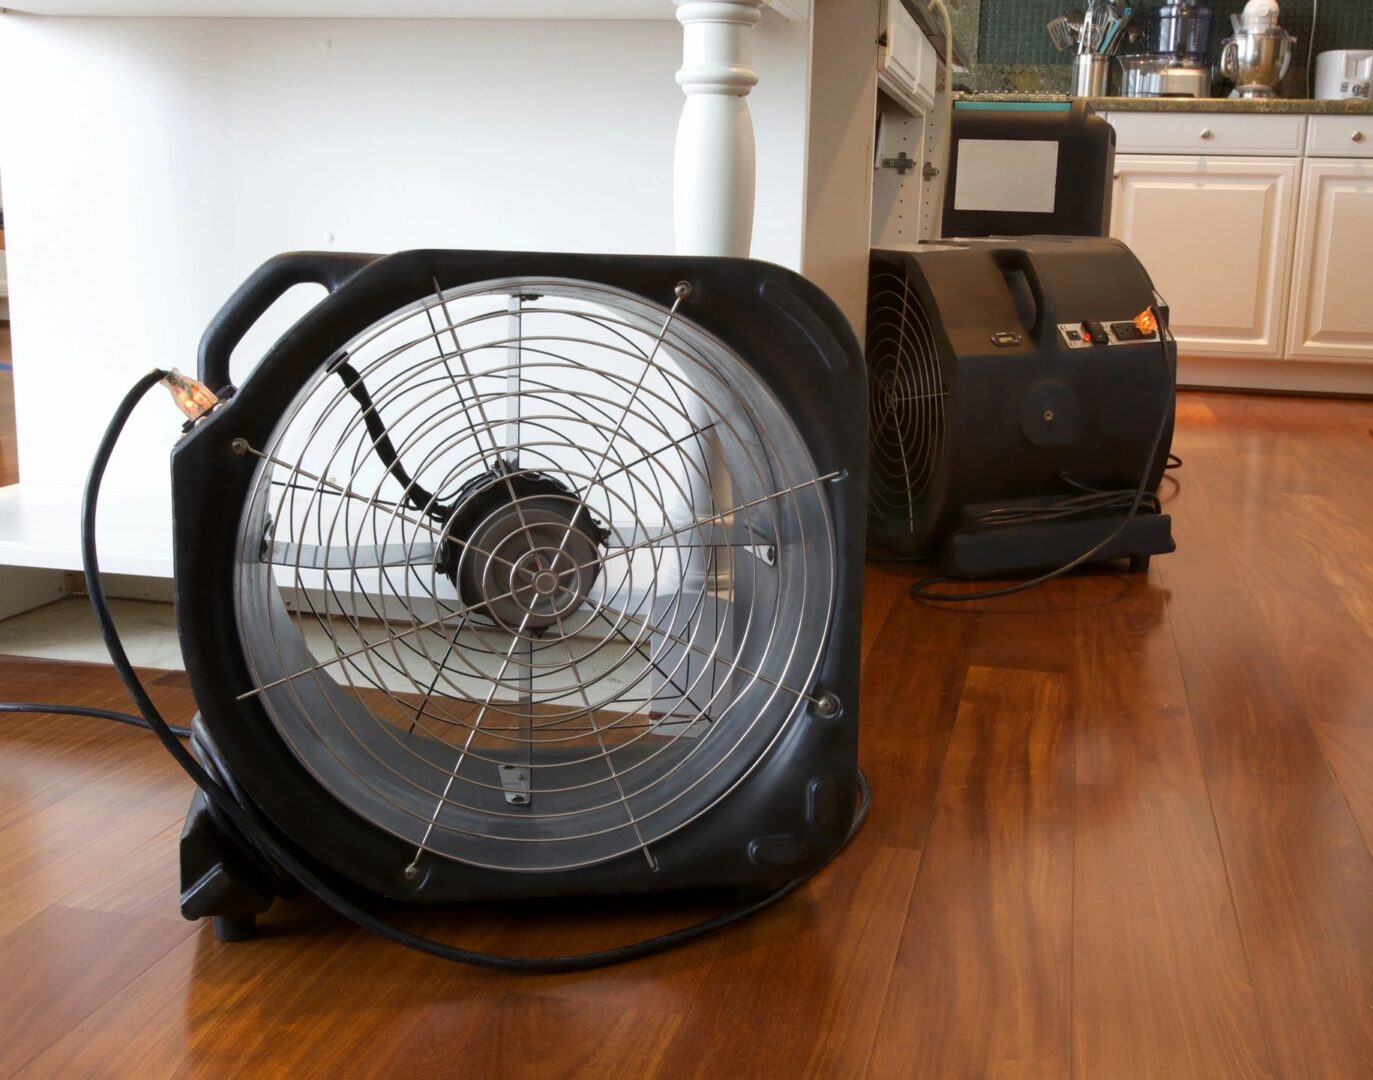 A fan is sitting on the floor next to an air conditioner.